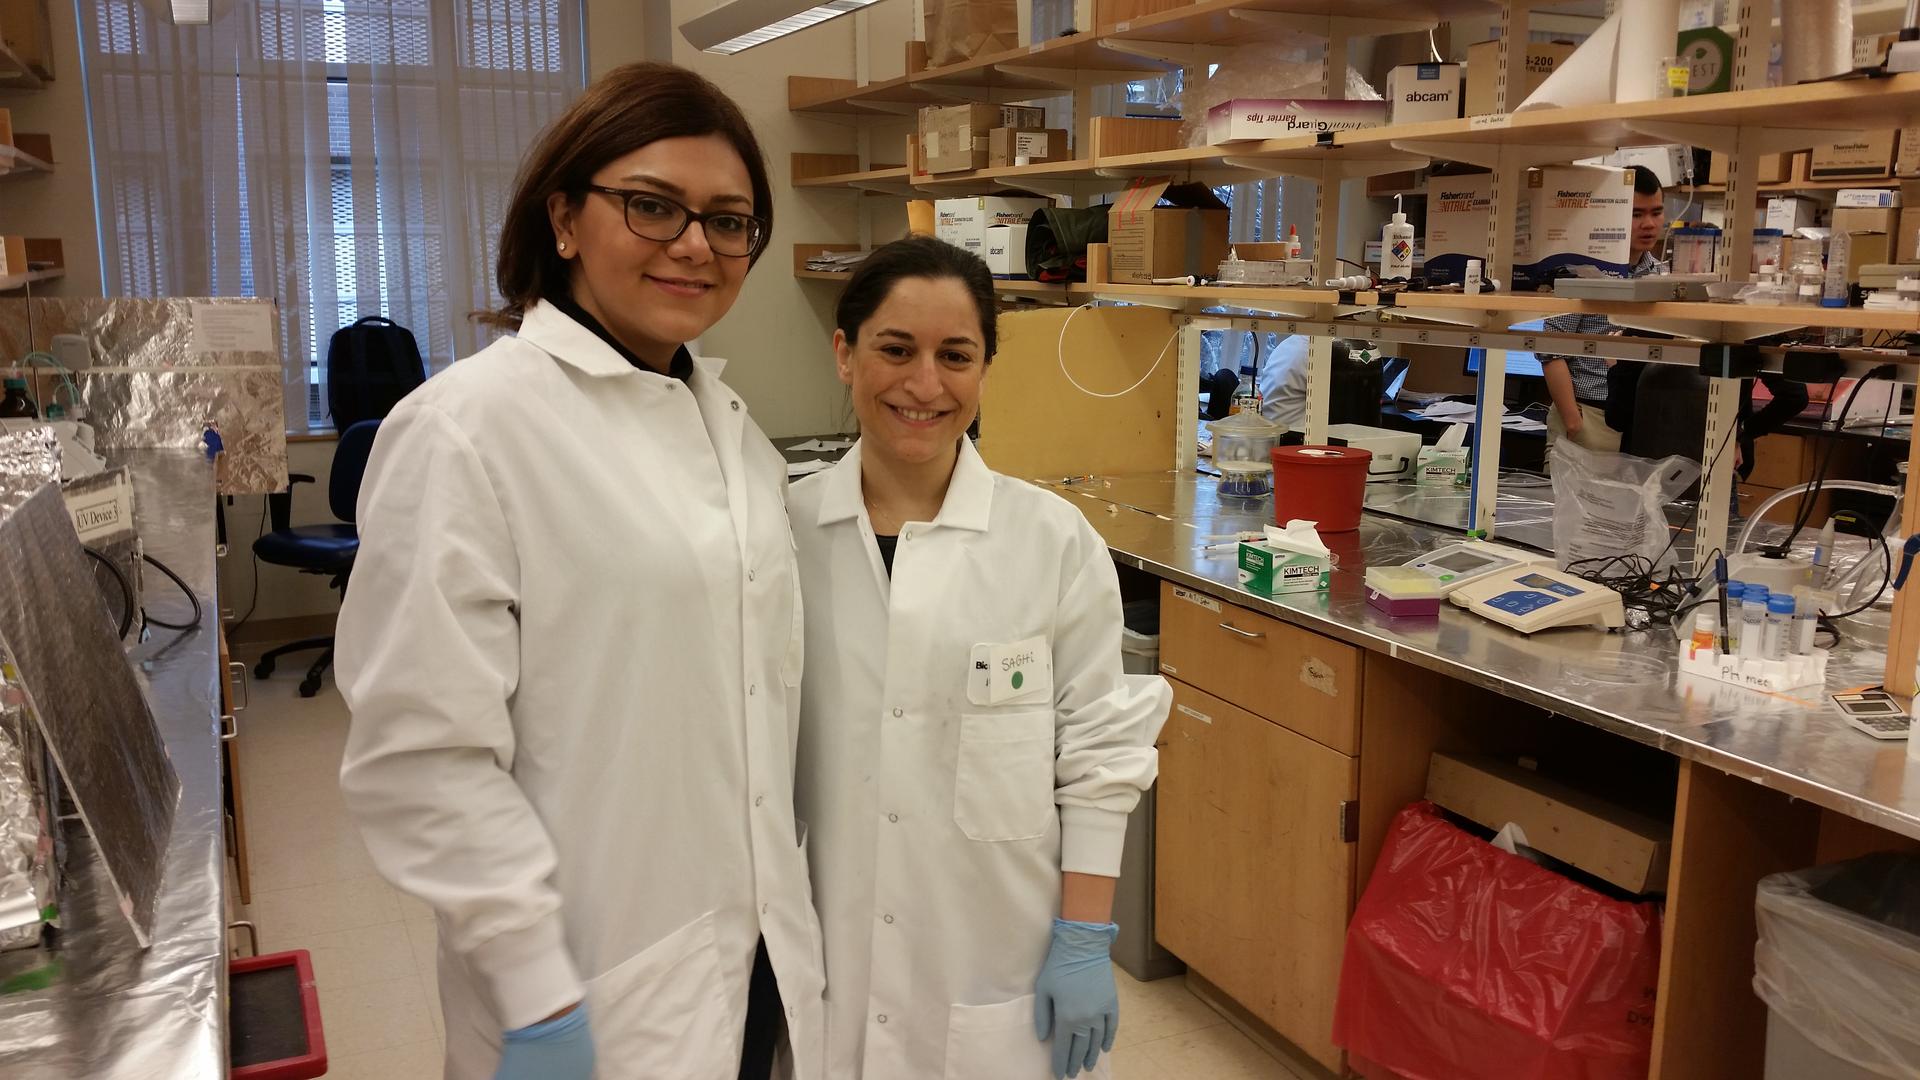 Two Iranian scientists who work at a Harvard laboratory